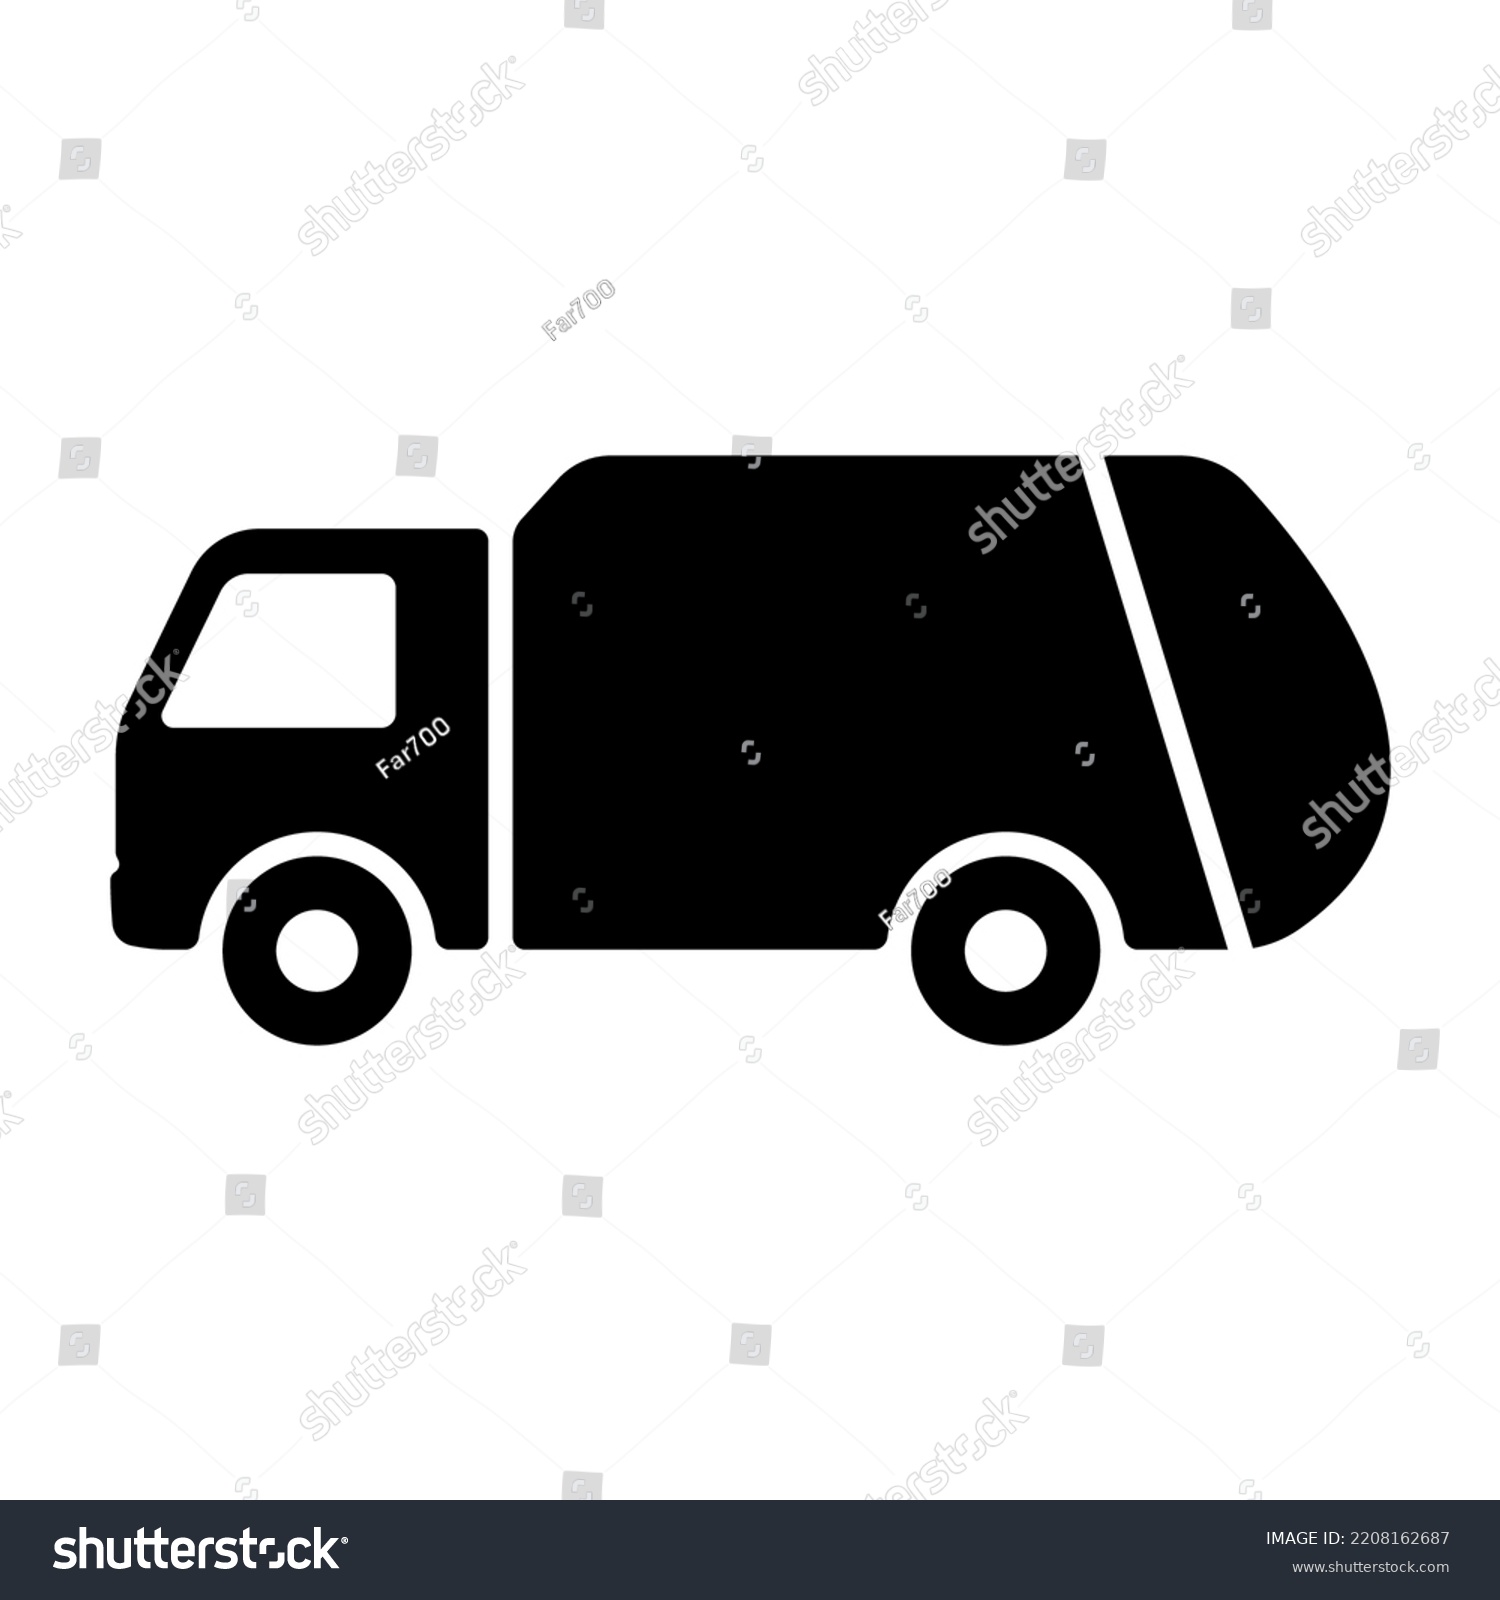 SVG of Garbage truck icon. Black silhouette. Side view. Vector simple flat graphic illustration. Isolated object on a white background. Isolate. svg